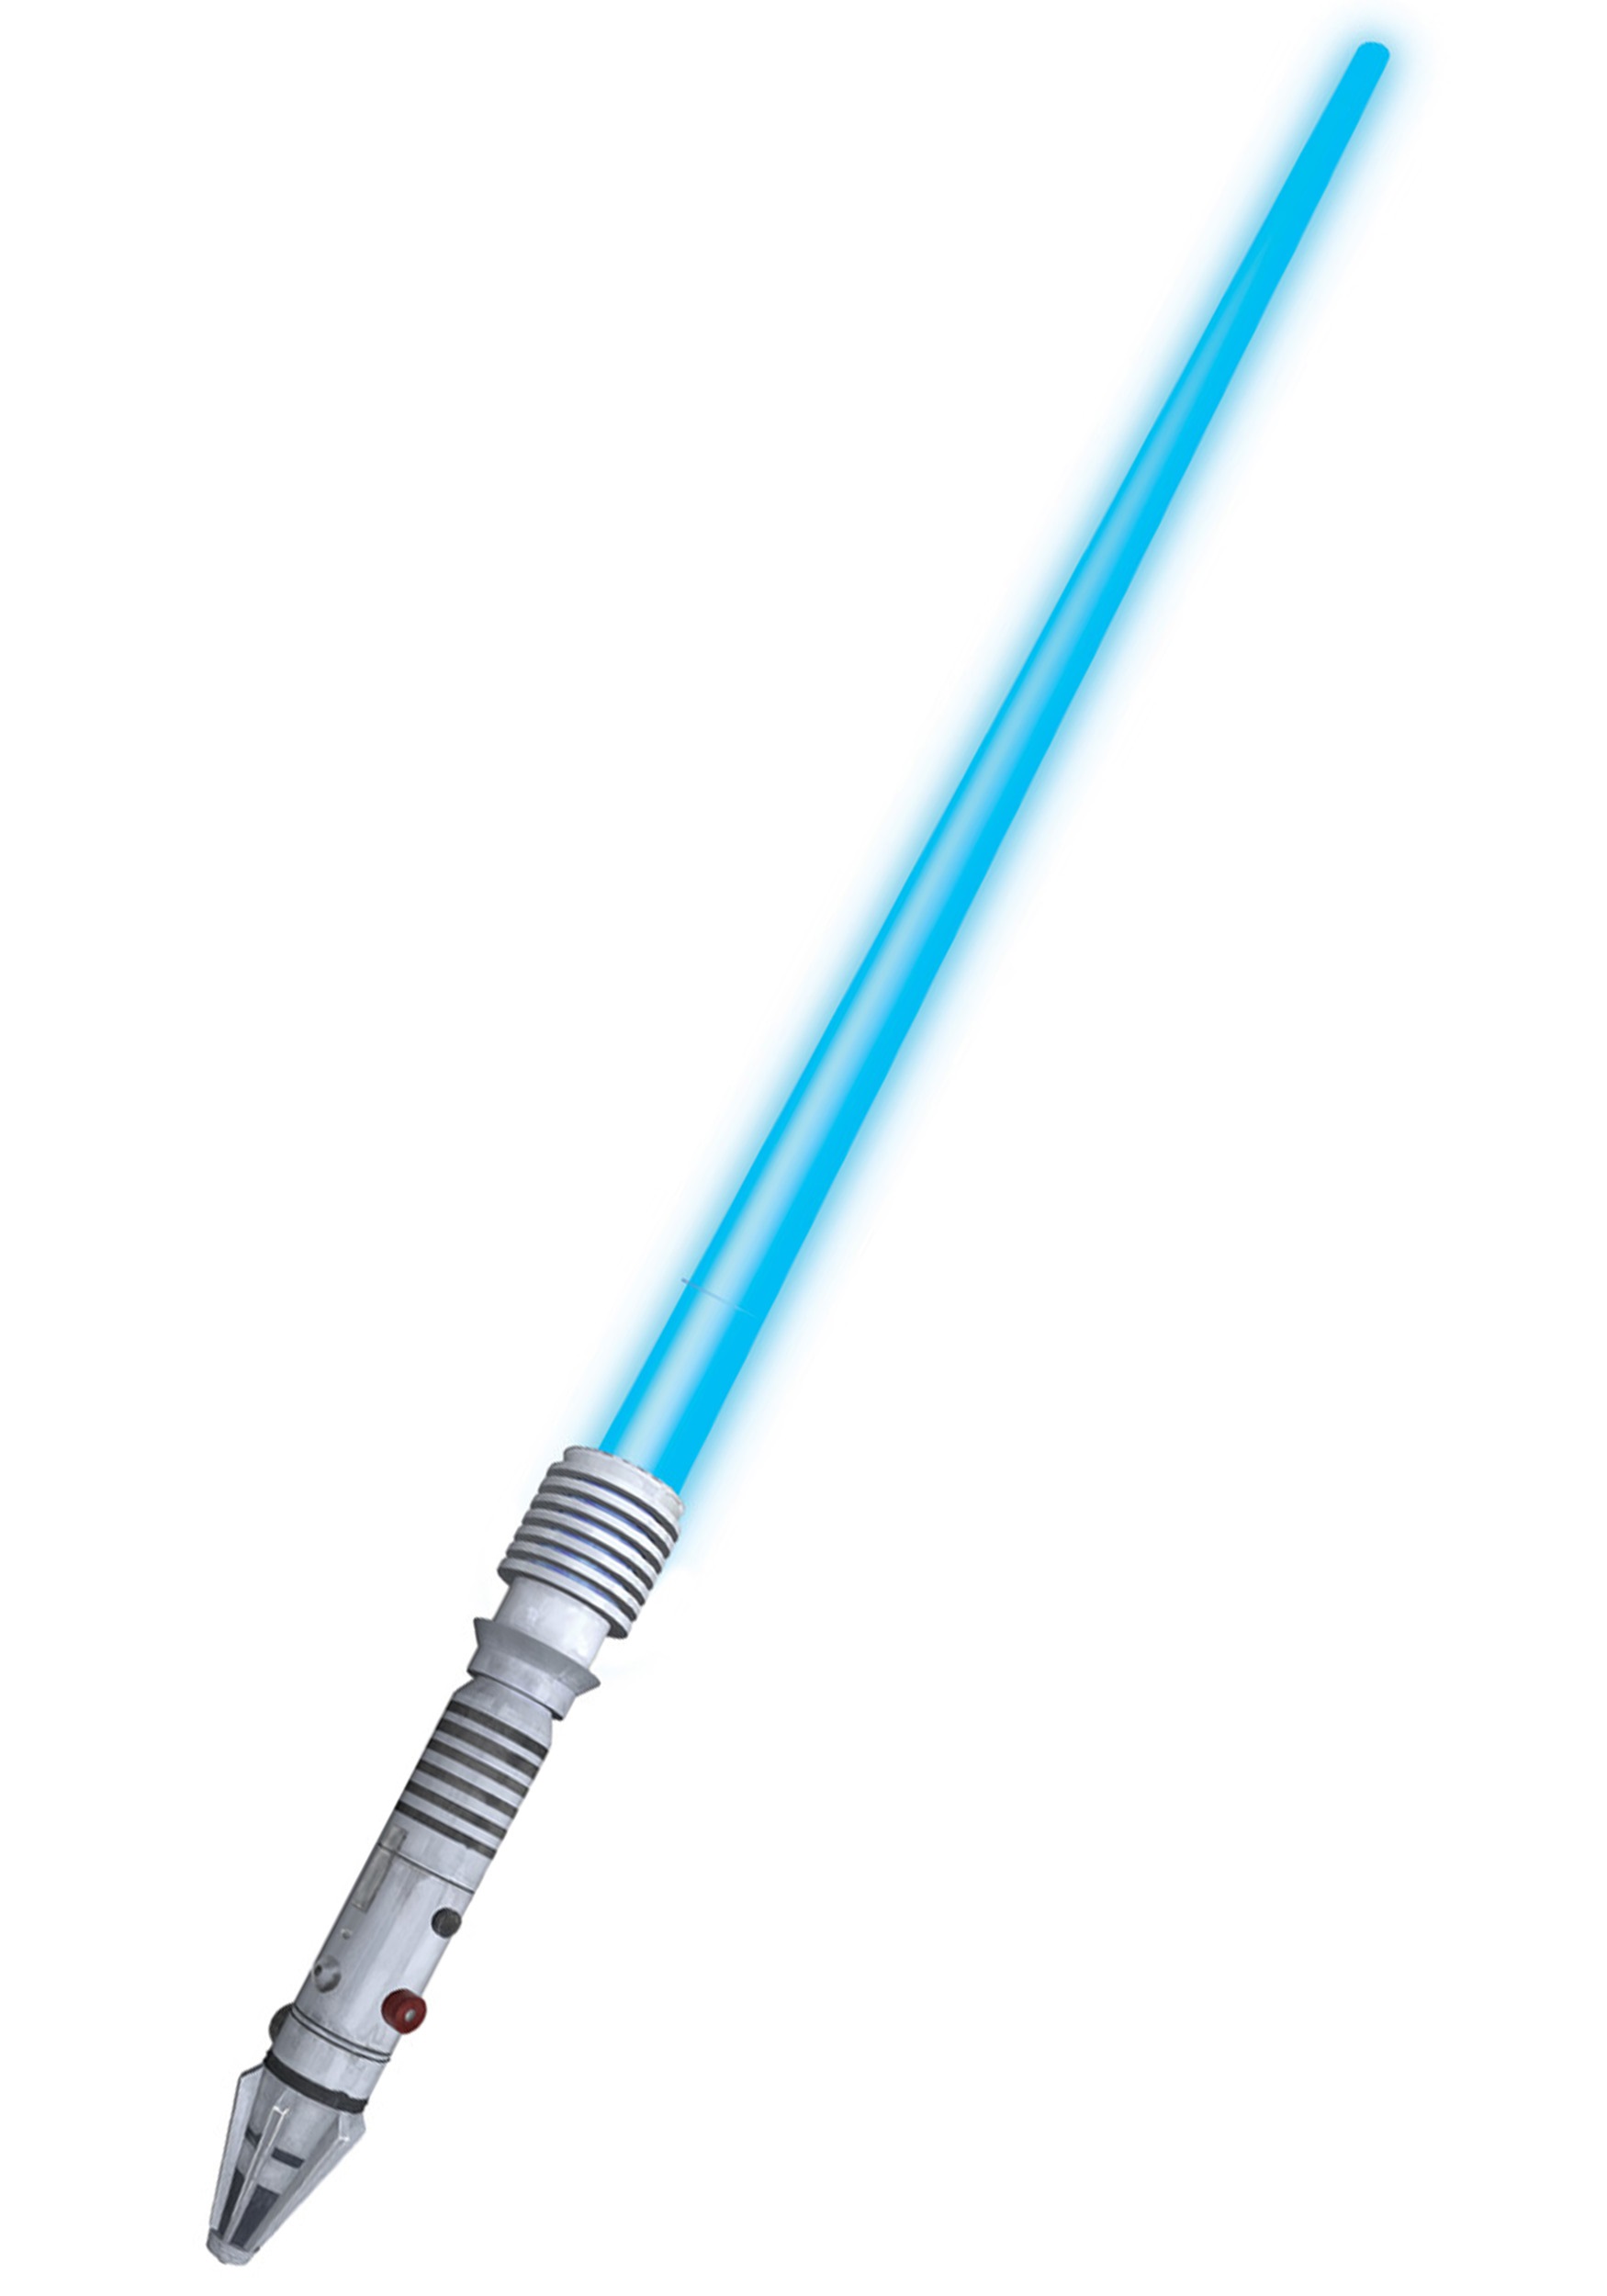 Tools Tool Weapons Lightsaber